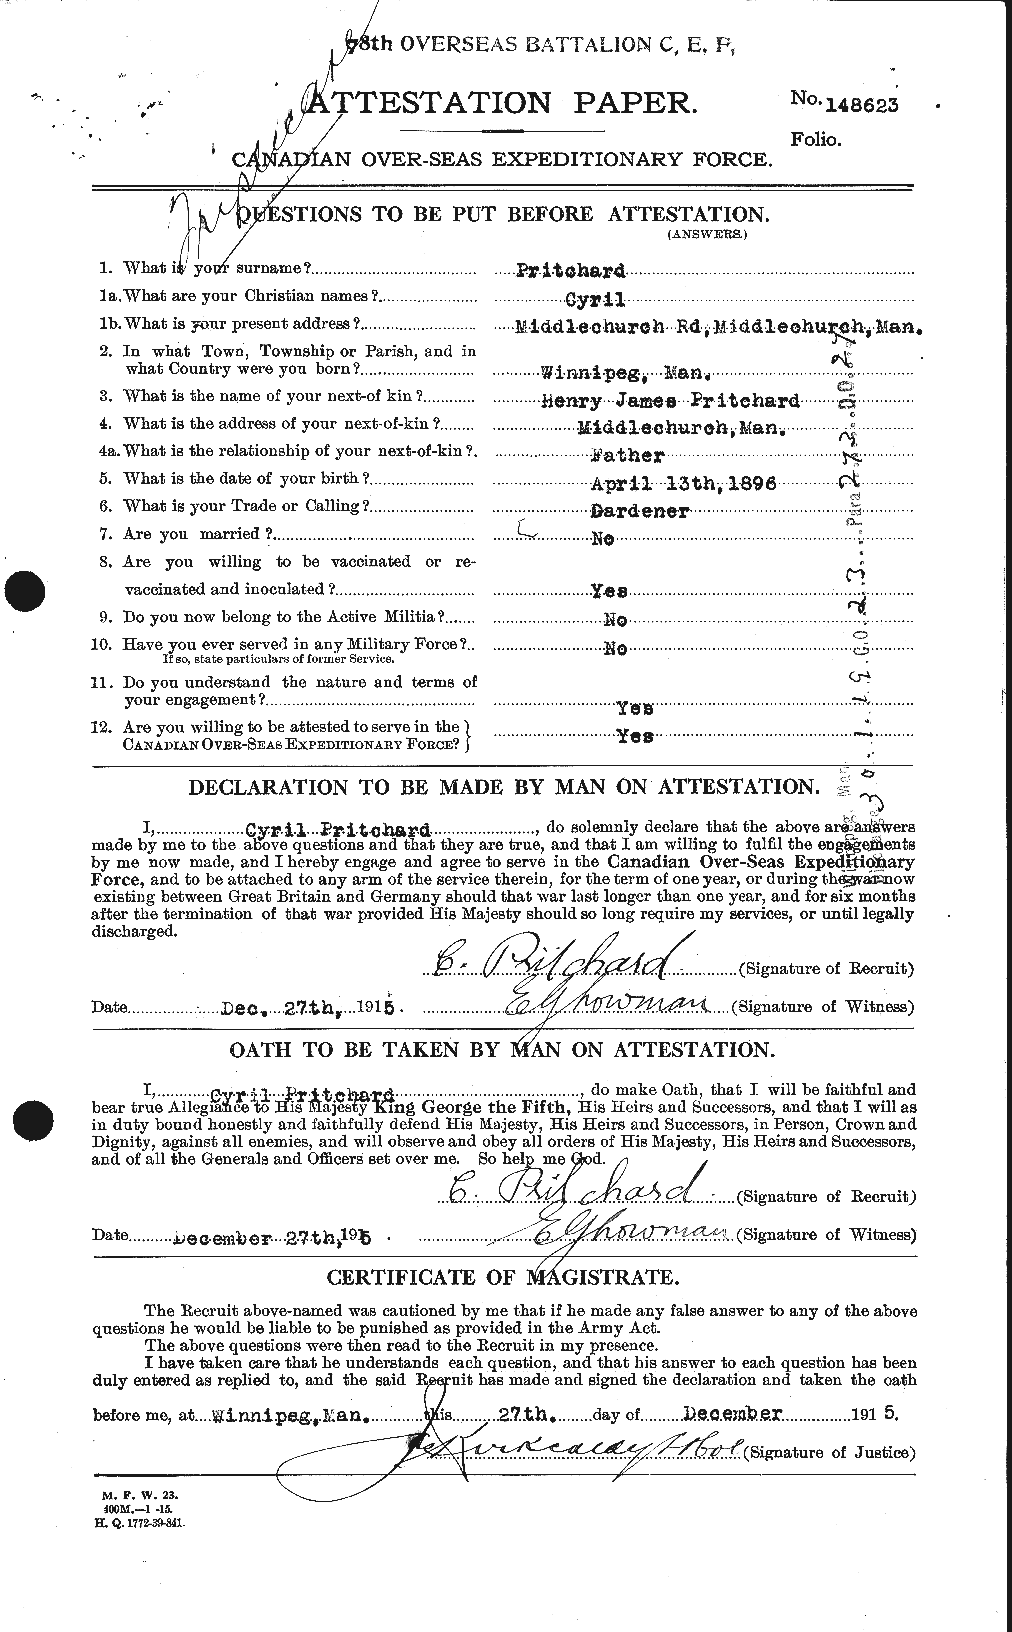 Personnel Records of the First World War - CEF 588501a